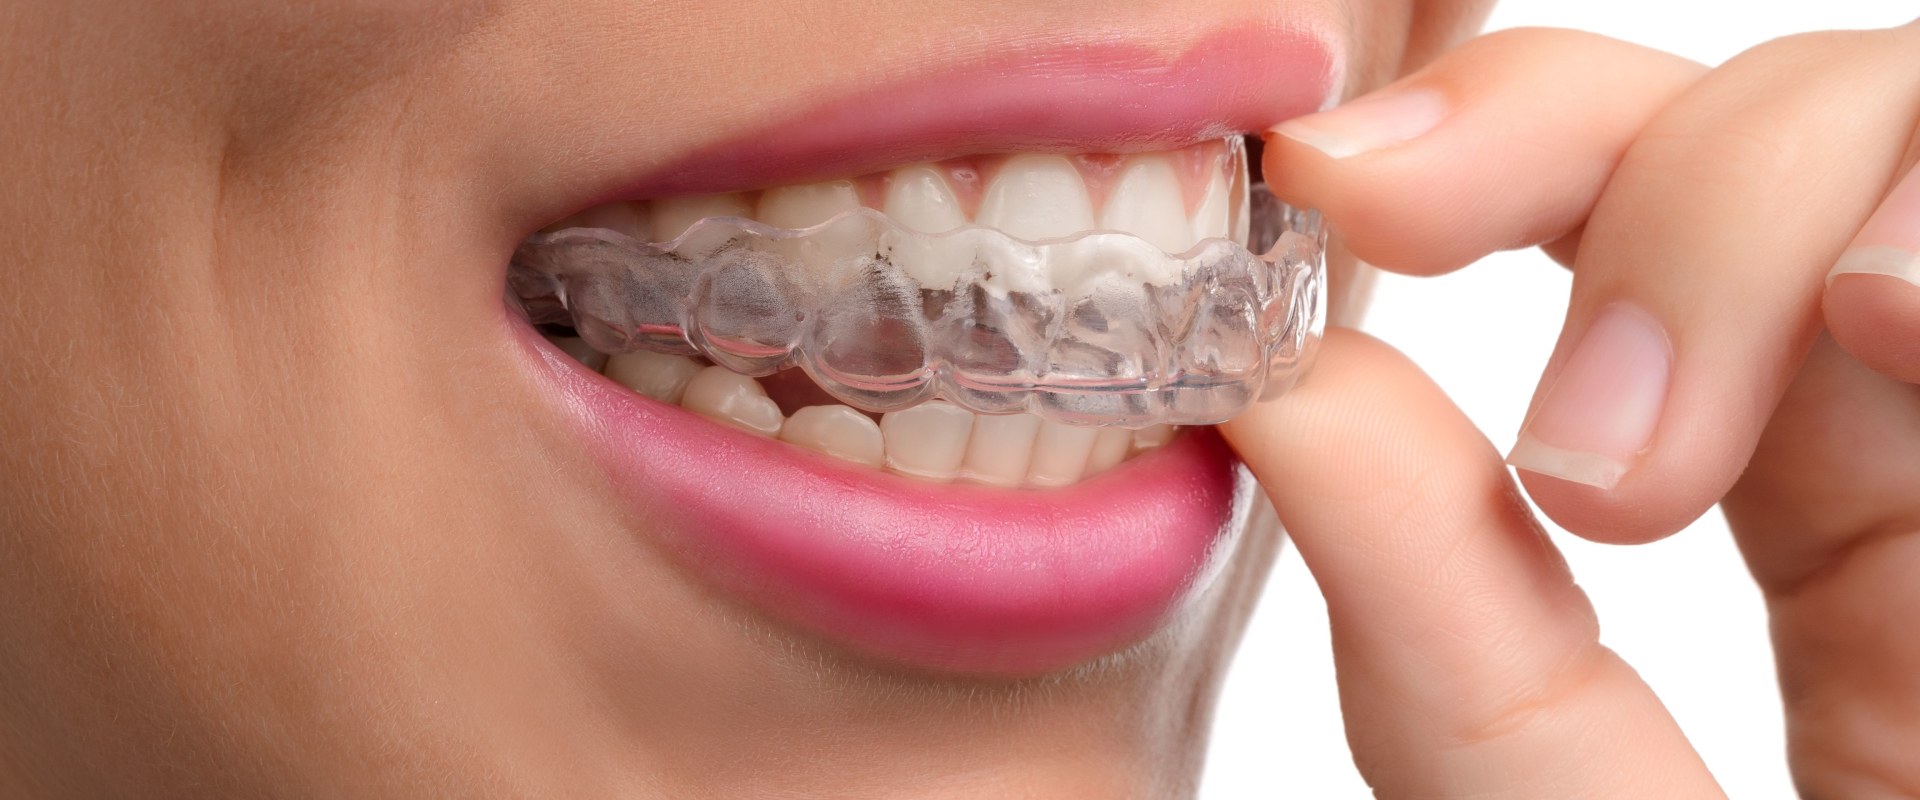 How long is invisalign supposed to last?